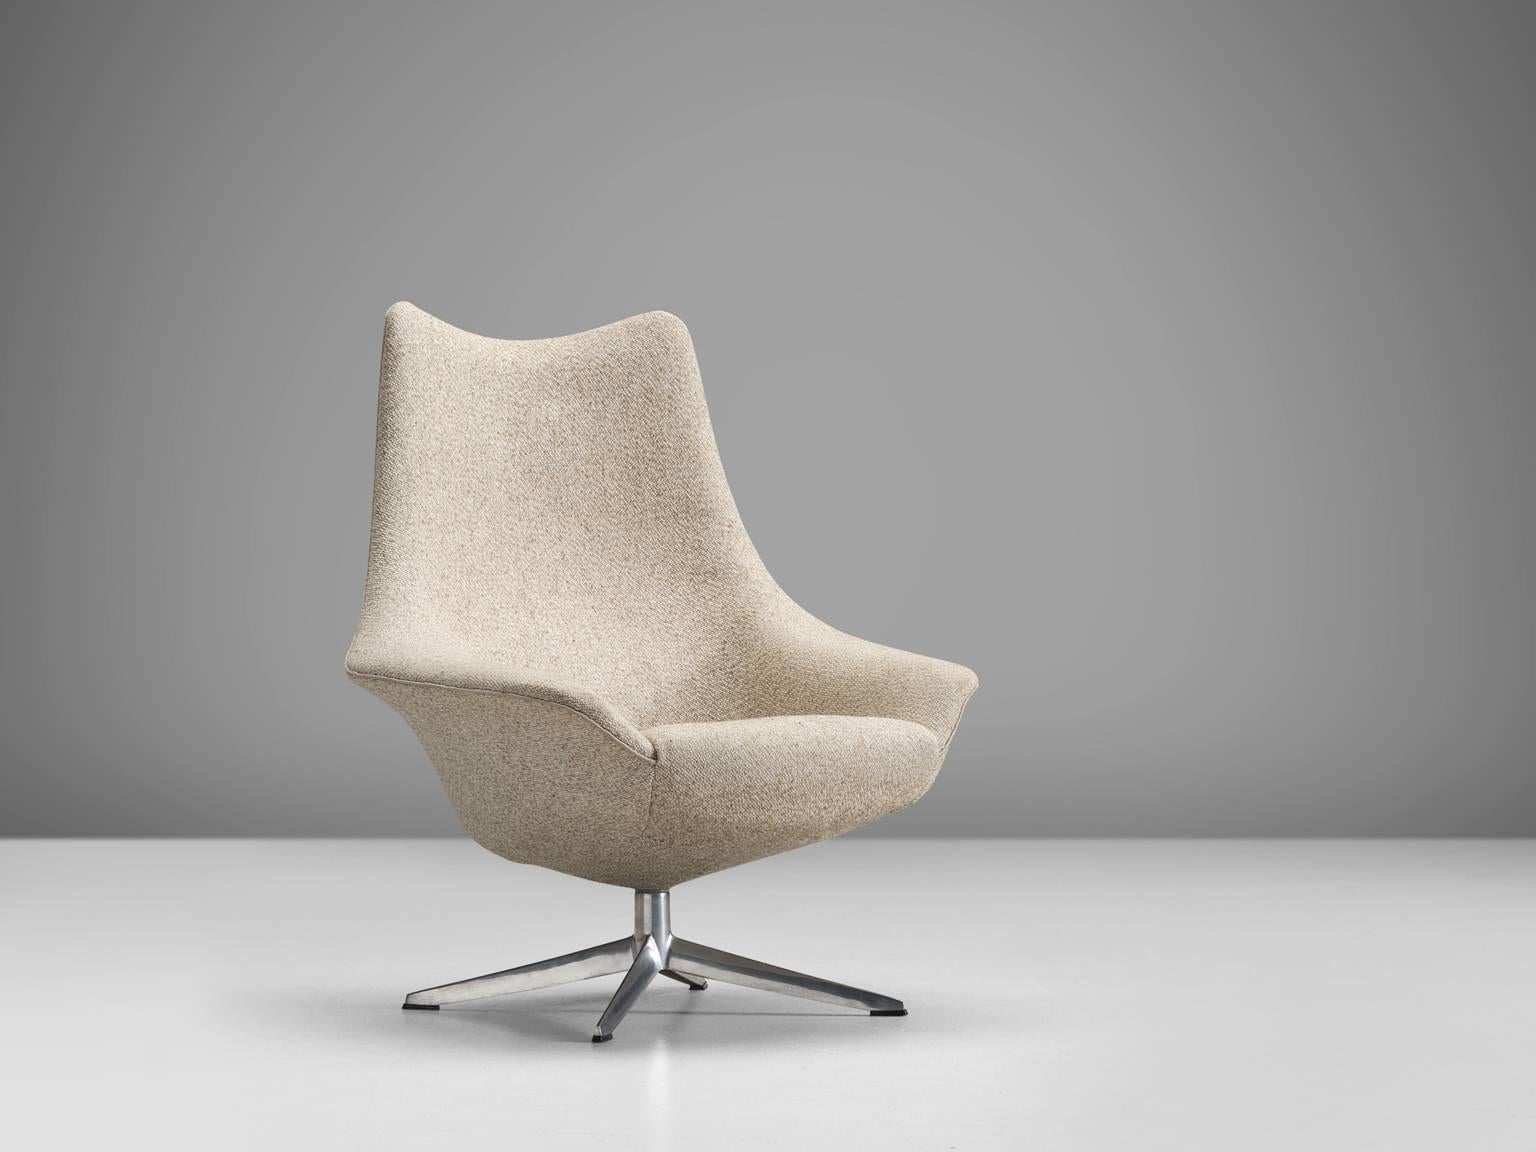 H.W. Klein for Bramin Møbler, upholstered in beige to grey upholstery and steel, Denmark, 1960s

This armchair features a metal frame and has pivot function and is upholstered with a grey cover. This wingback chair is a great example of Scandinavian